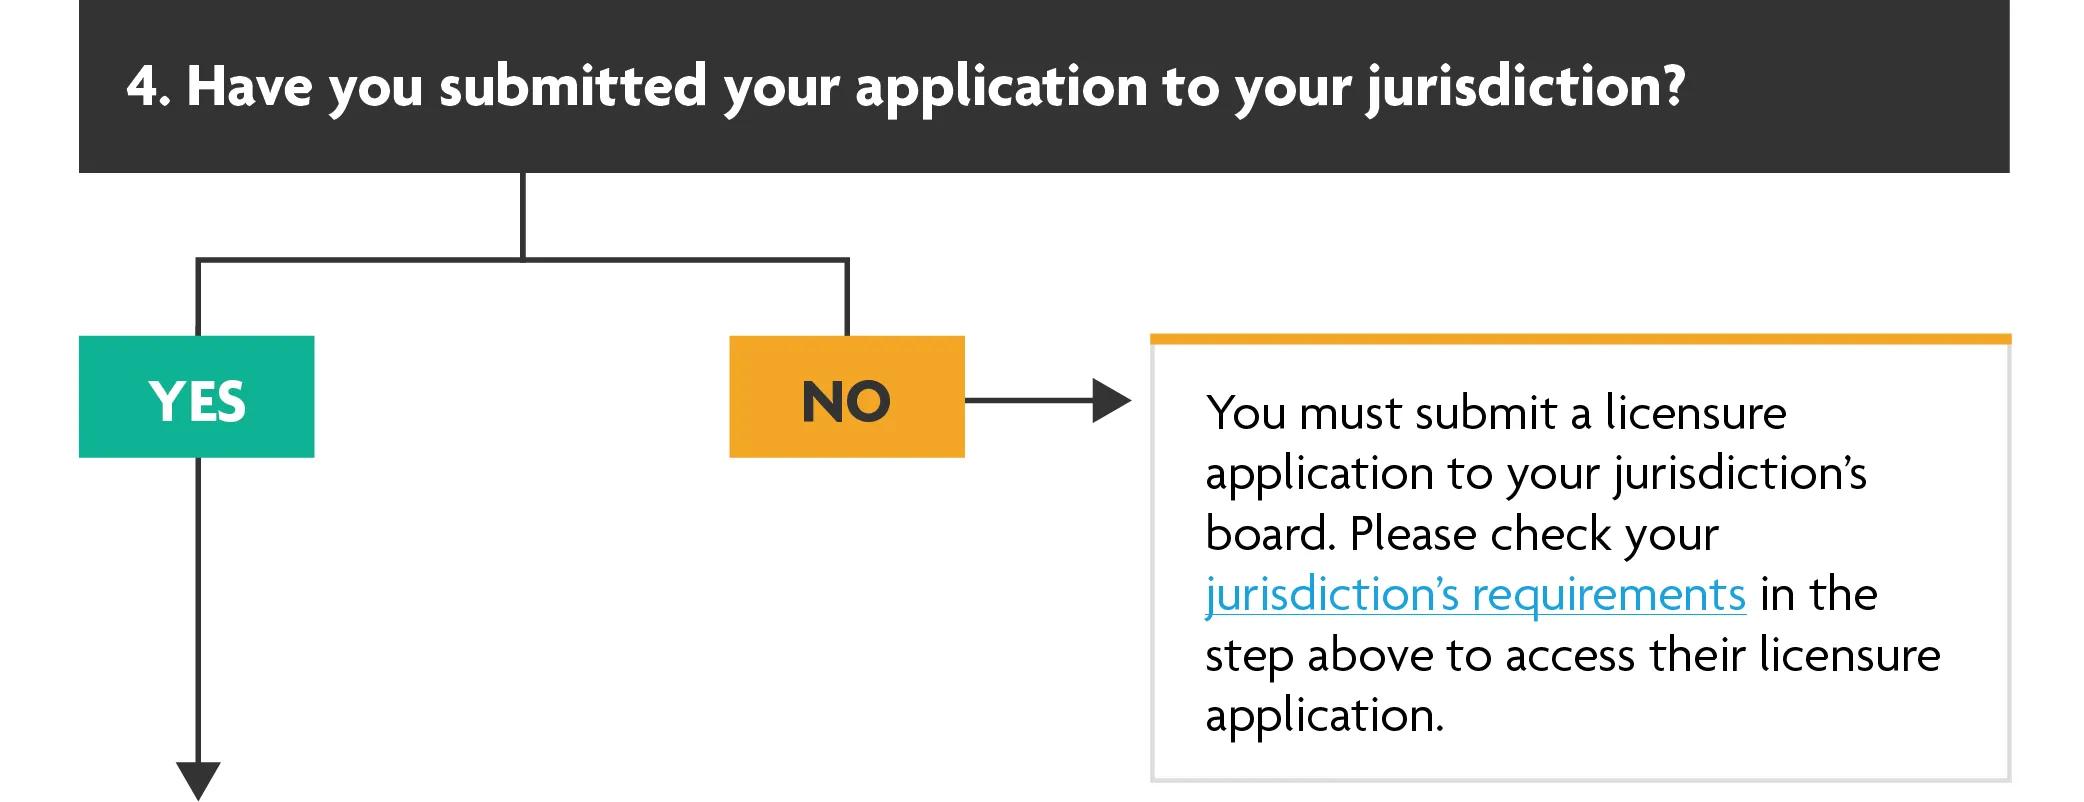 Question 4: Have you submitted your application to your jurisdiction? If yes: Move to the next step. If no: You must submit a licensure application to your jurisdiction’s board. Please check your jurisdiction’s requirements in the step above to access their licensure application.